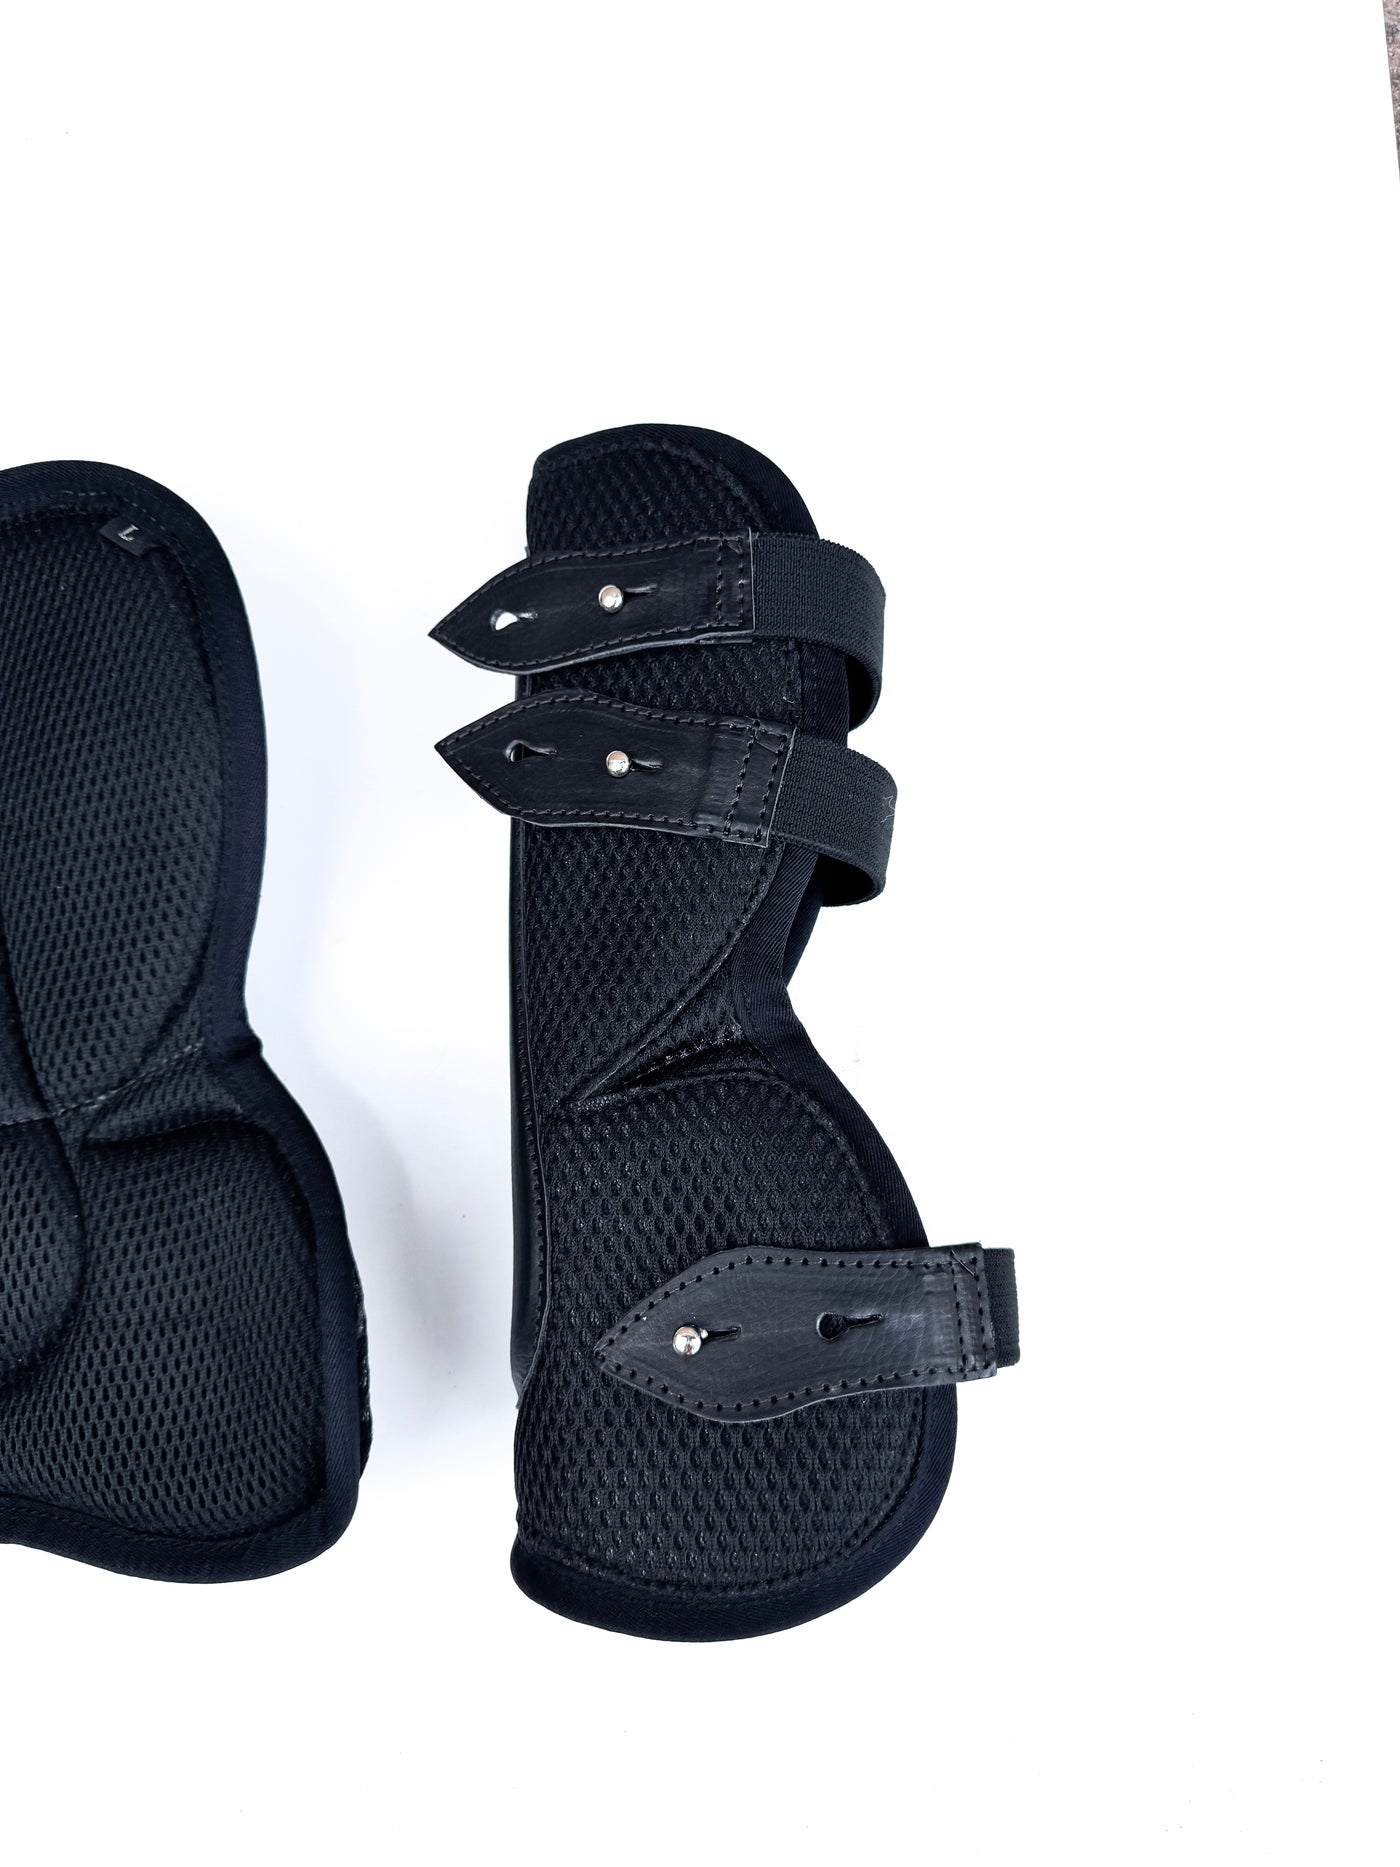 SAMPLE Airflow Tendon Boots - Size Full